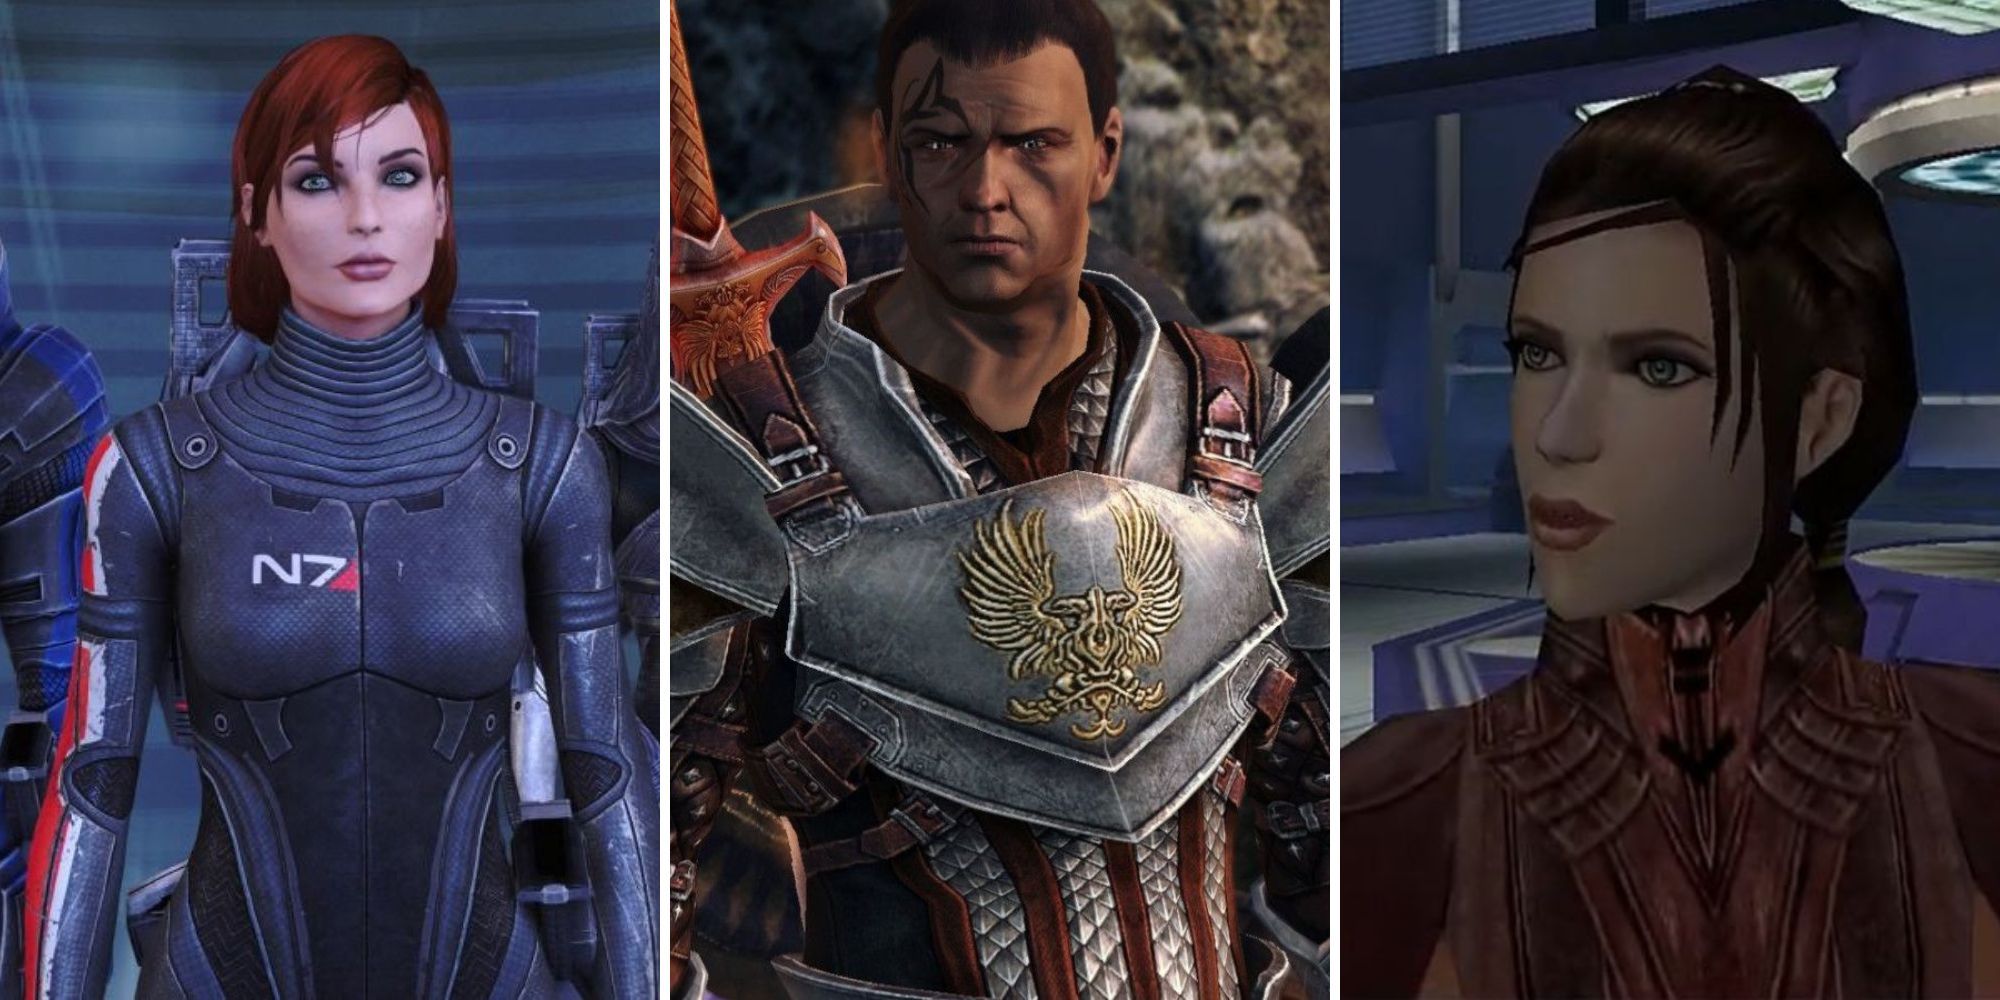 A grid showing three heroes from the BioWare games Mass Effect, Dragon Age: Origins, and Star Wars: Knights of the Old Republic